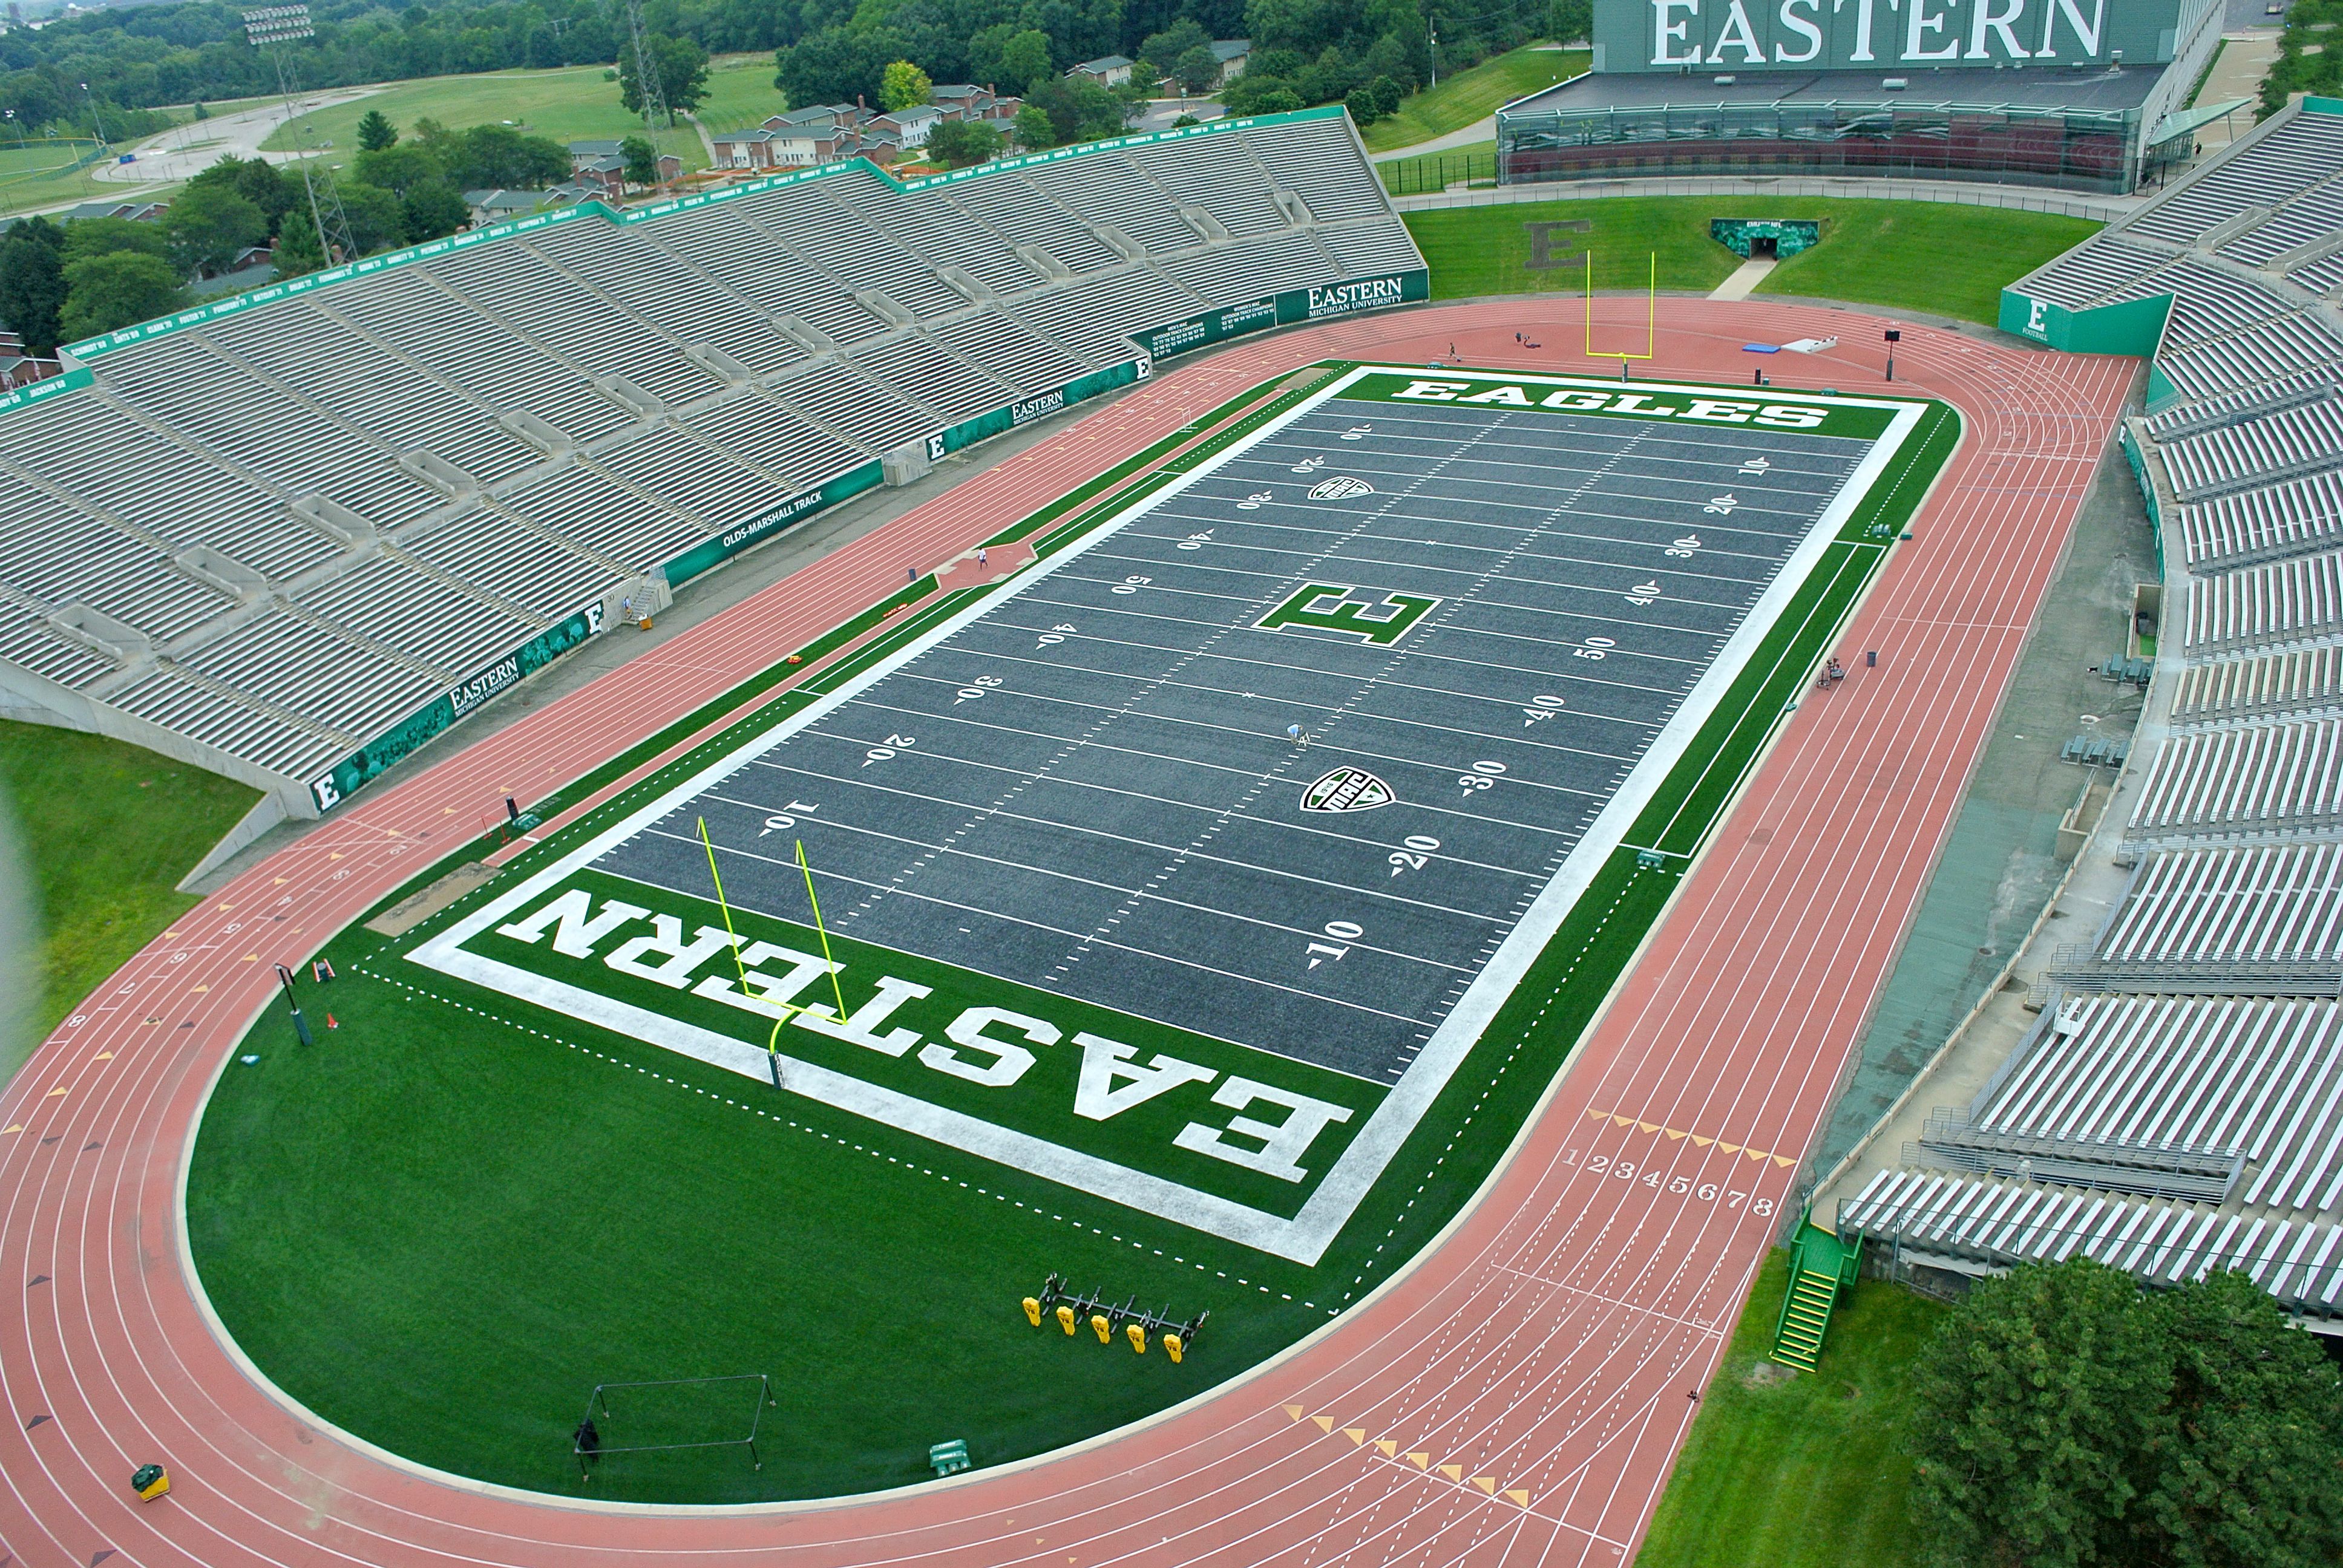 Eastern Michigan will become the fourth Mid-American Conference school with women's lacrosse, joining Central Michigan, Kent State and Akron, which is adding the sport in 2020. Detroit Mercy and Youngstown State will join as "affiliate" members.